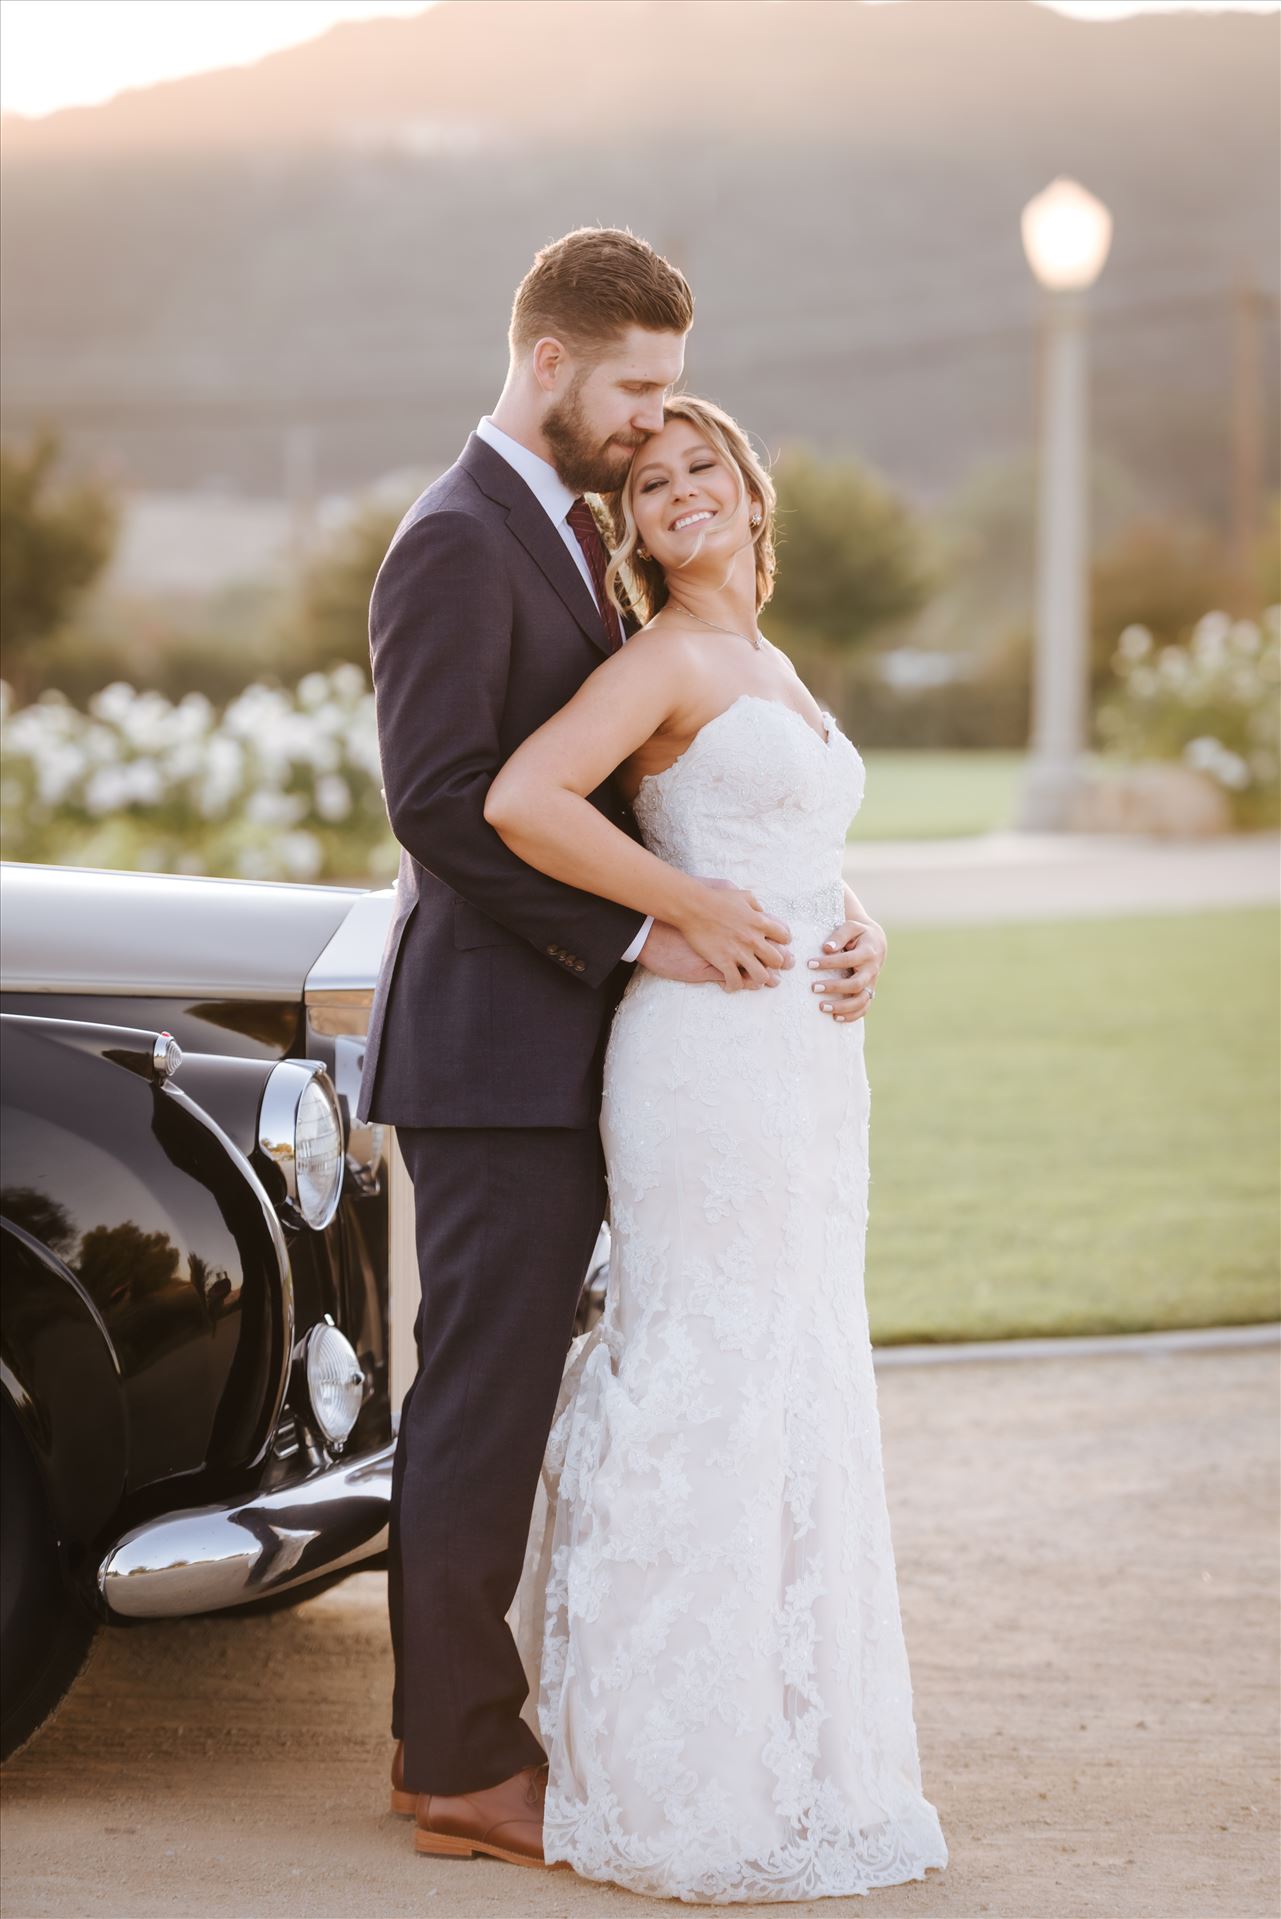 Port-7541.JPG White Barn in Edna Valley rustic chic wedding by Mirror's Edge Photography, San Luis Obispo County Wedding and Engagement Photographer.  Sunset elegance with Rolls Royce and Bride and Groom in front of the White Barn in Edna Valley California. by Sarah Williams